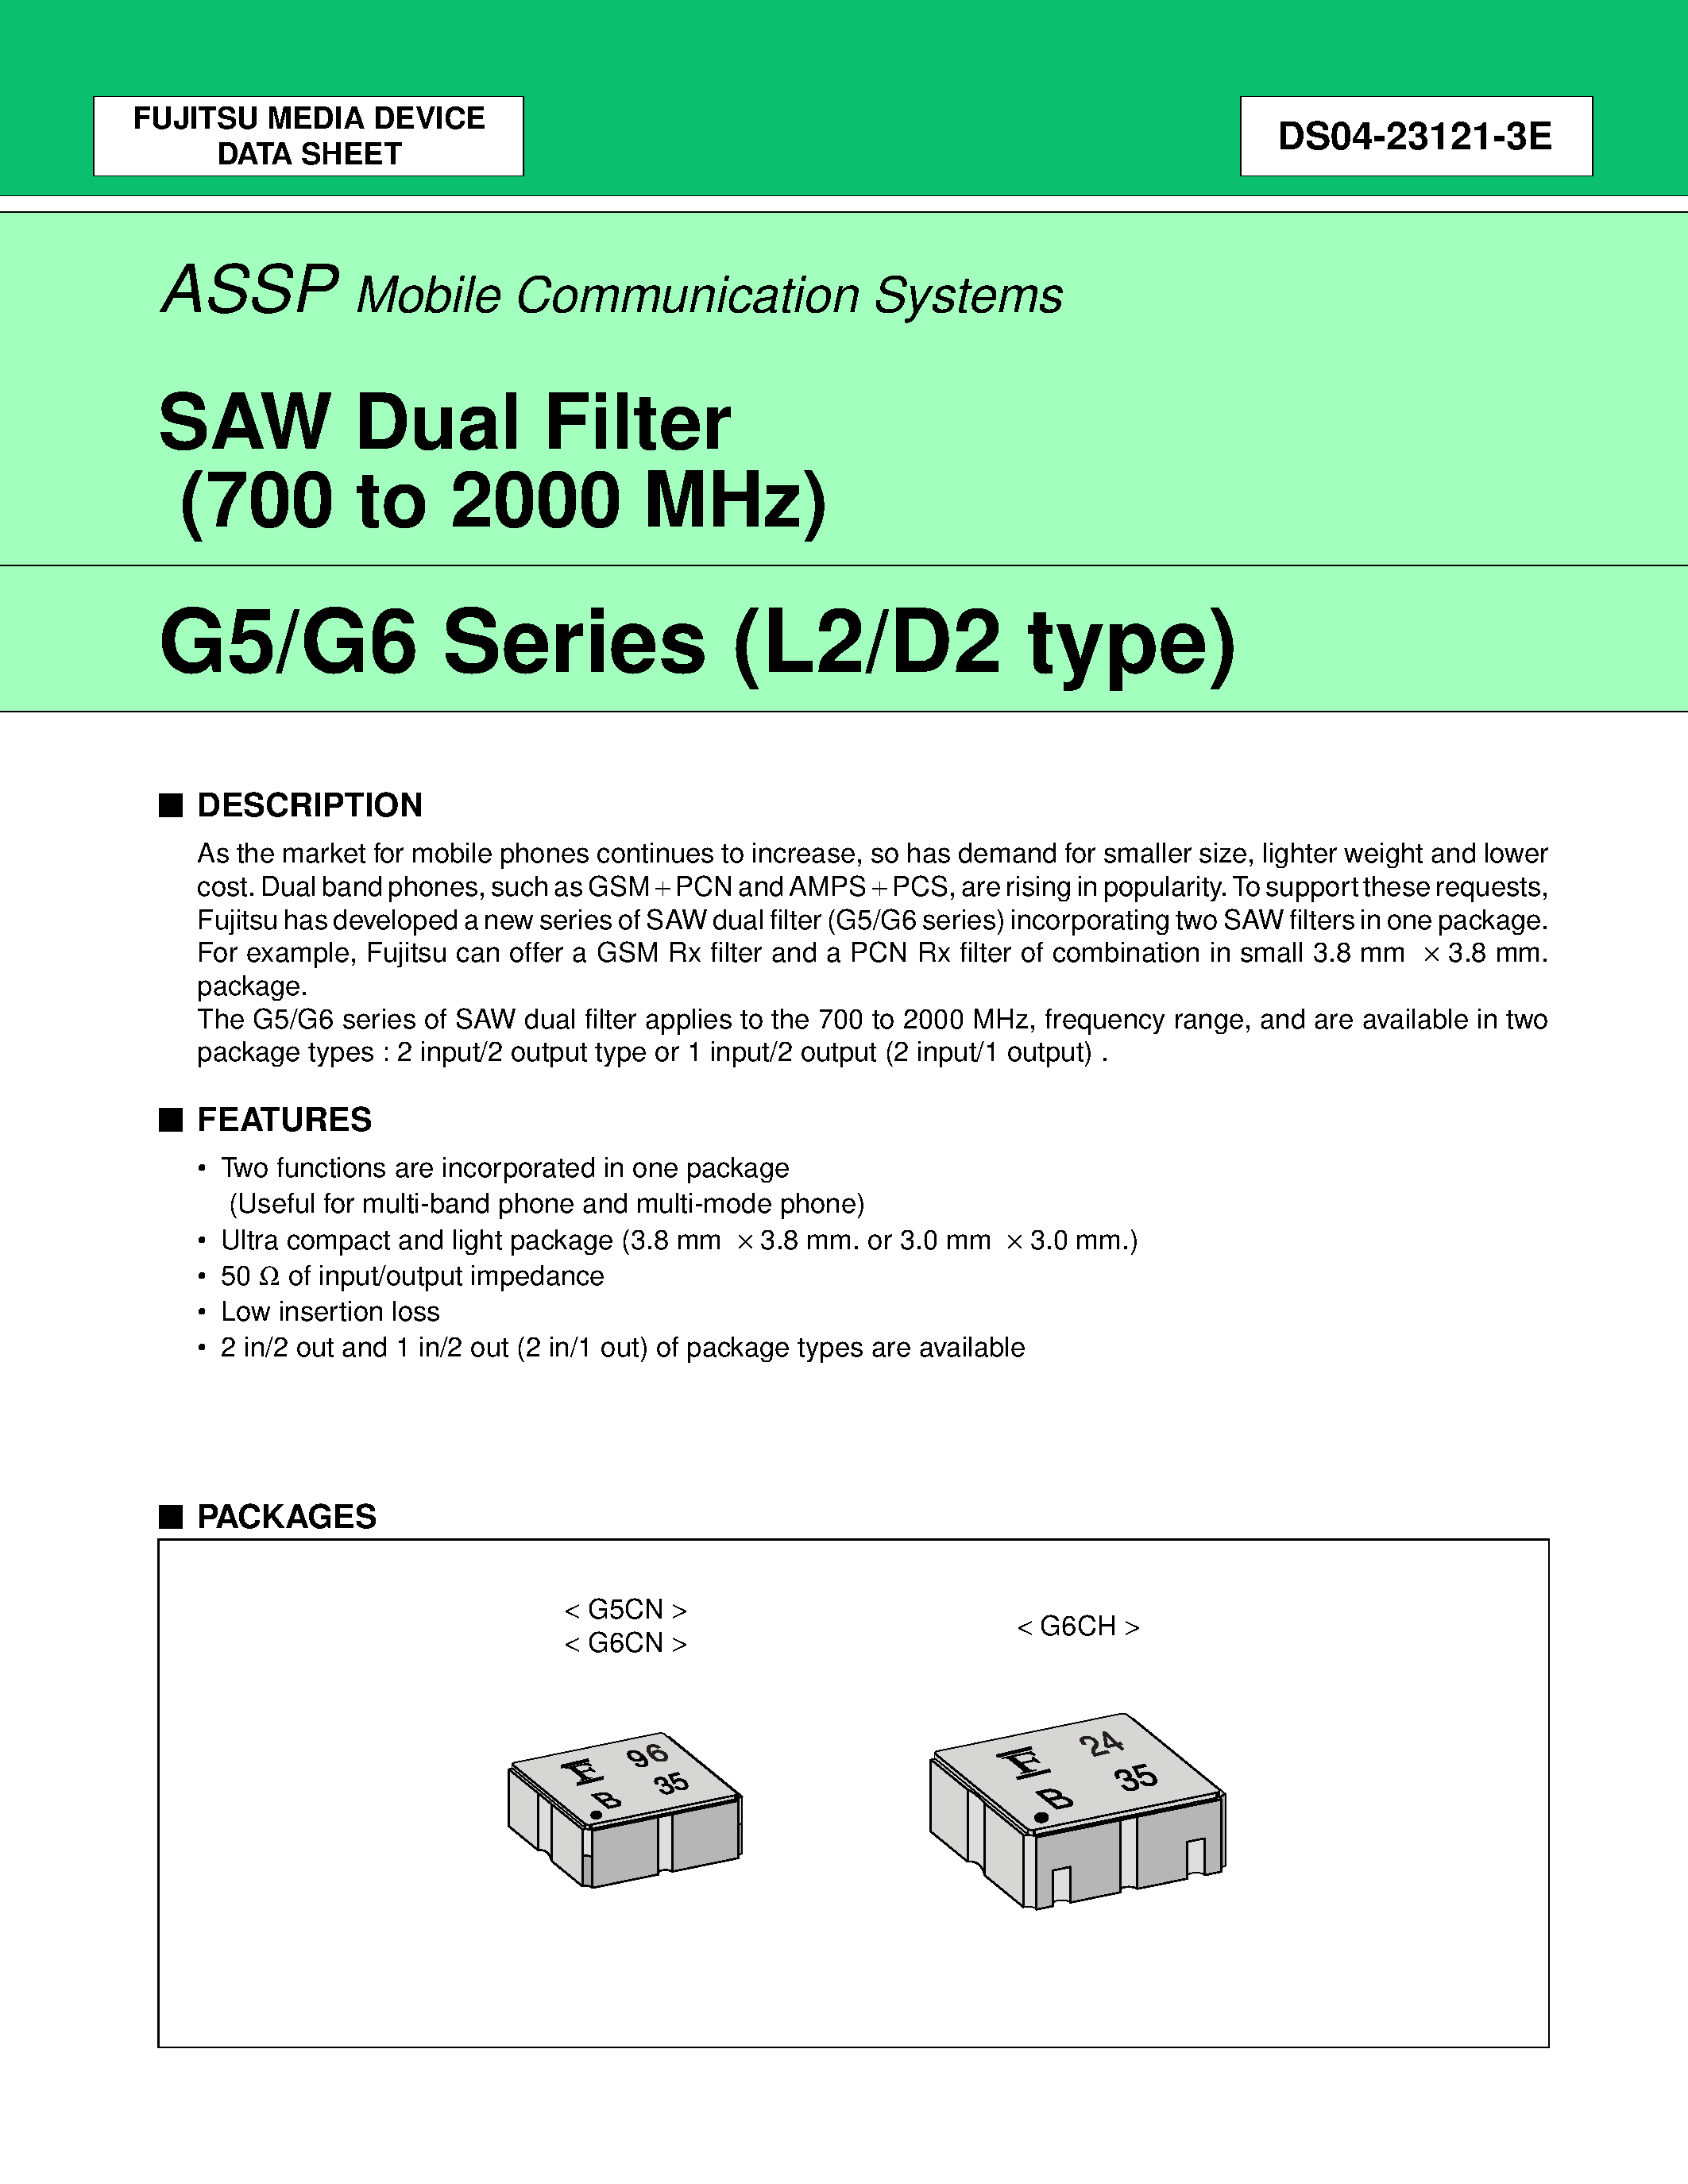 Datasheet FAR-G5CN-942M50-D296-V - SAW Dual Filter (700 to 2000 MHz) page 1